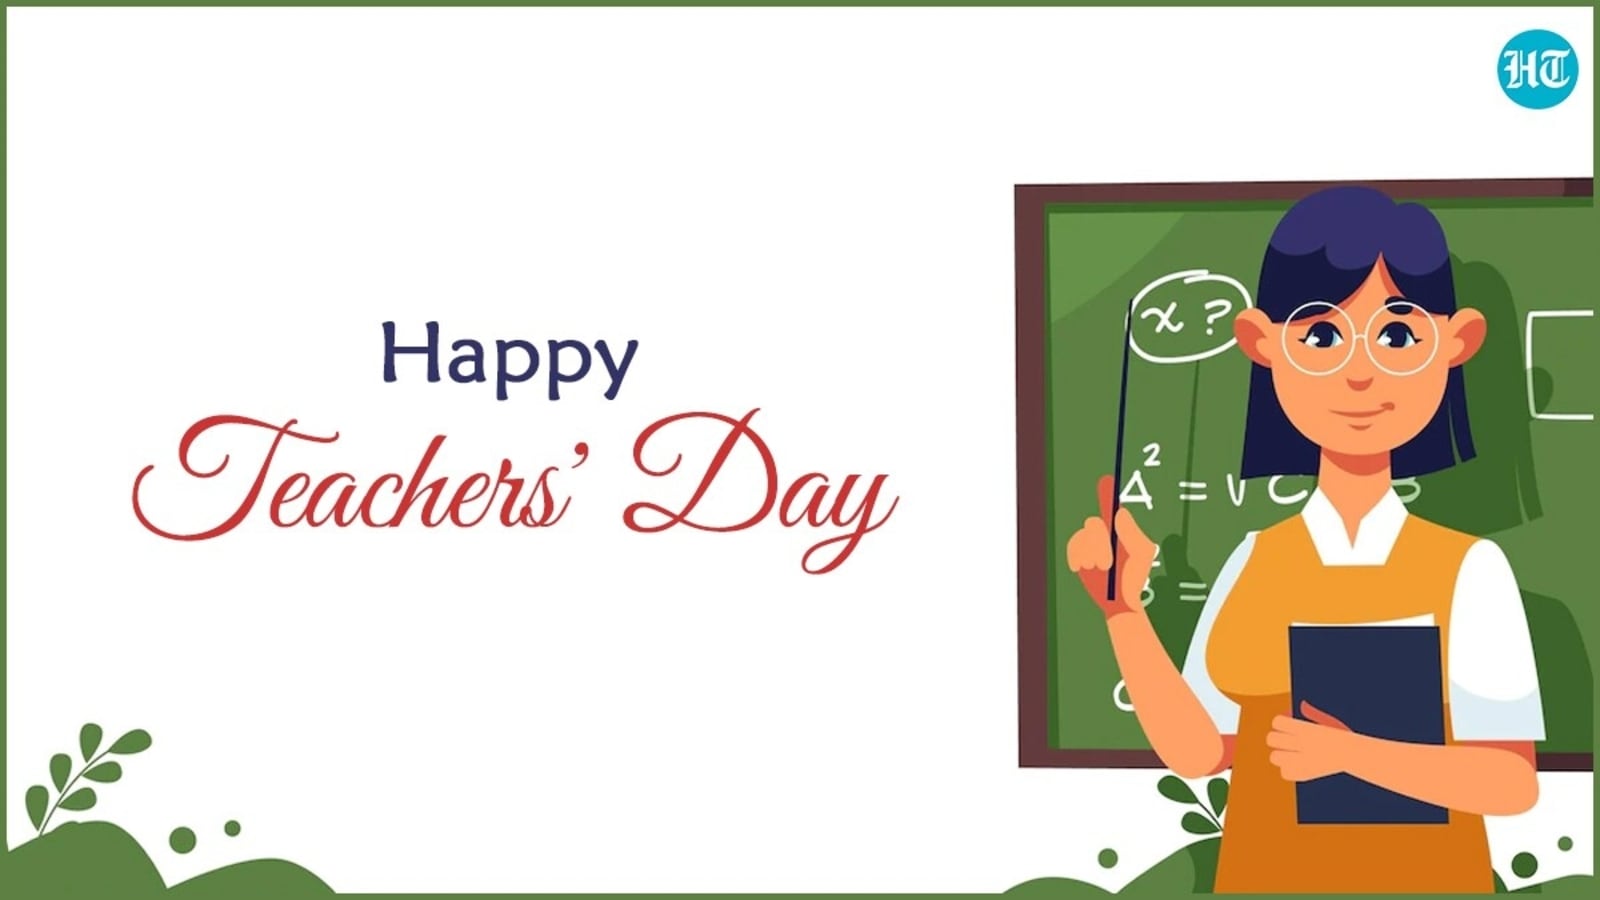 Heart-warming Happy Teachers Day 2020 Images, Pictures & HD Wallpapers | Teachers  day card, Teachers day drawing, Happy teachers day